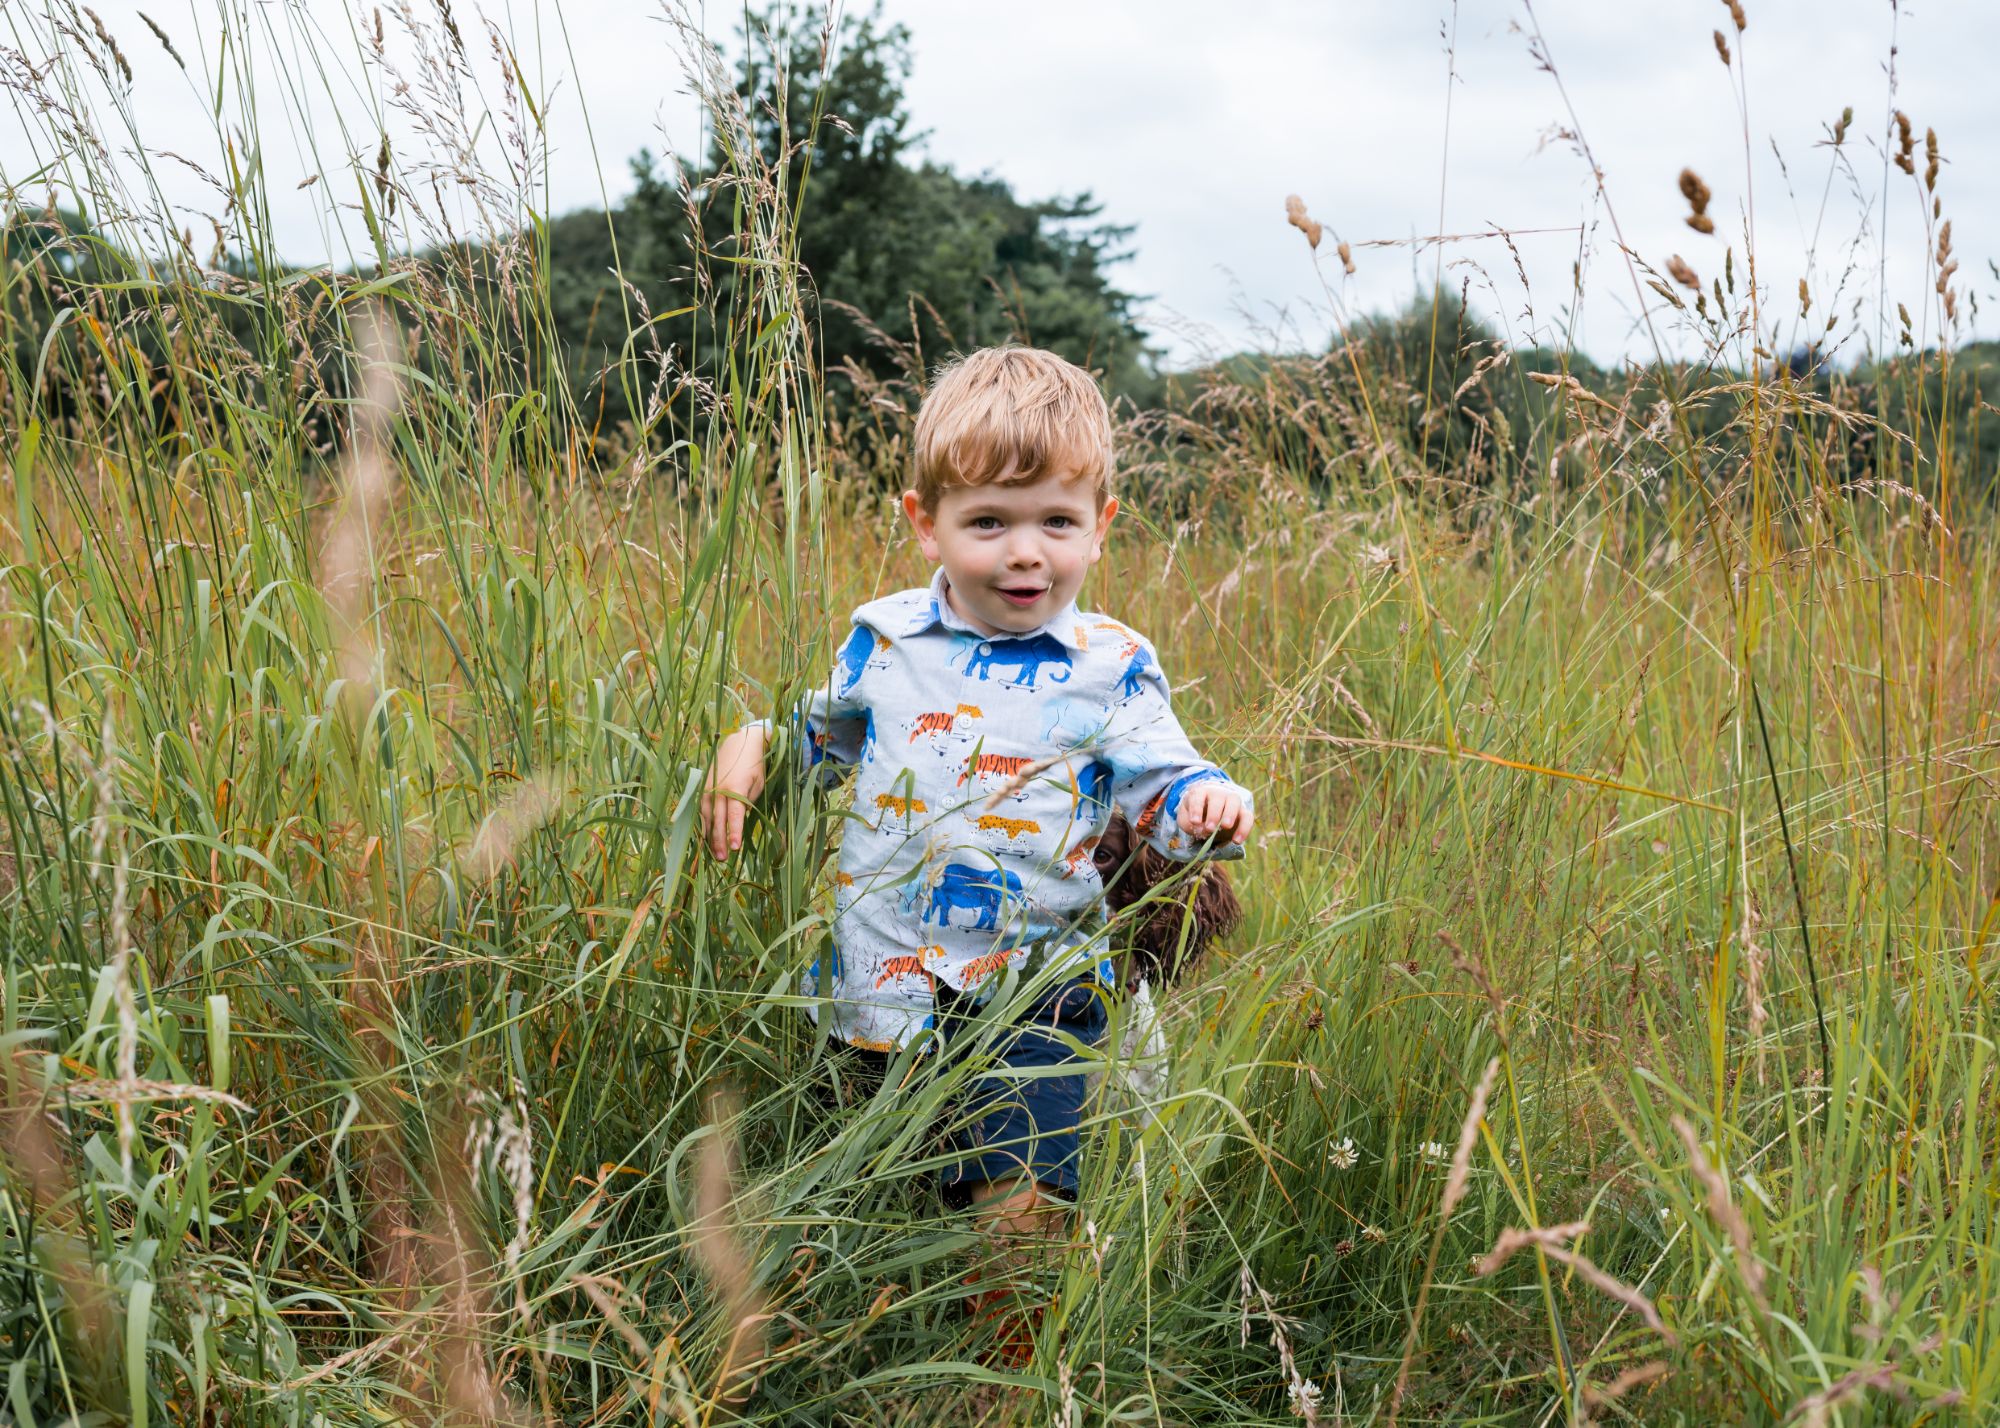 A little boy walks through the tall grasses in a field, he's surprised to find the photographer lay down to get the same eye level as him so is pulling a funny face